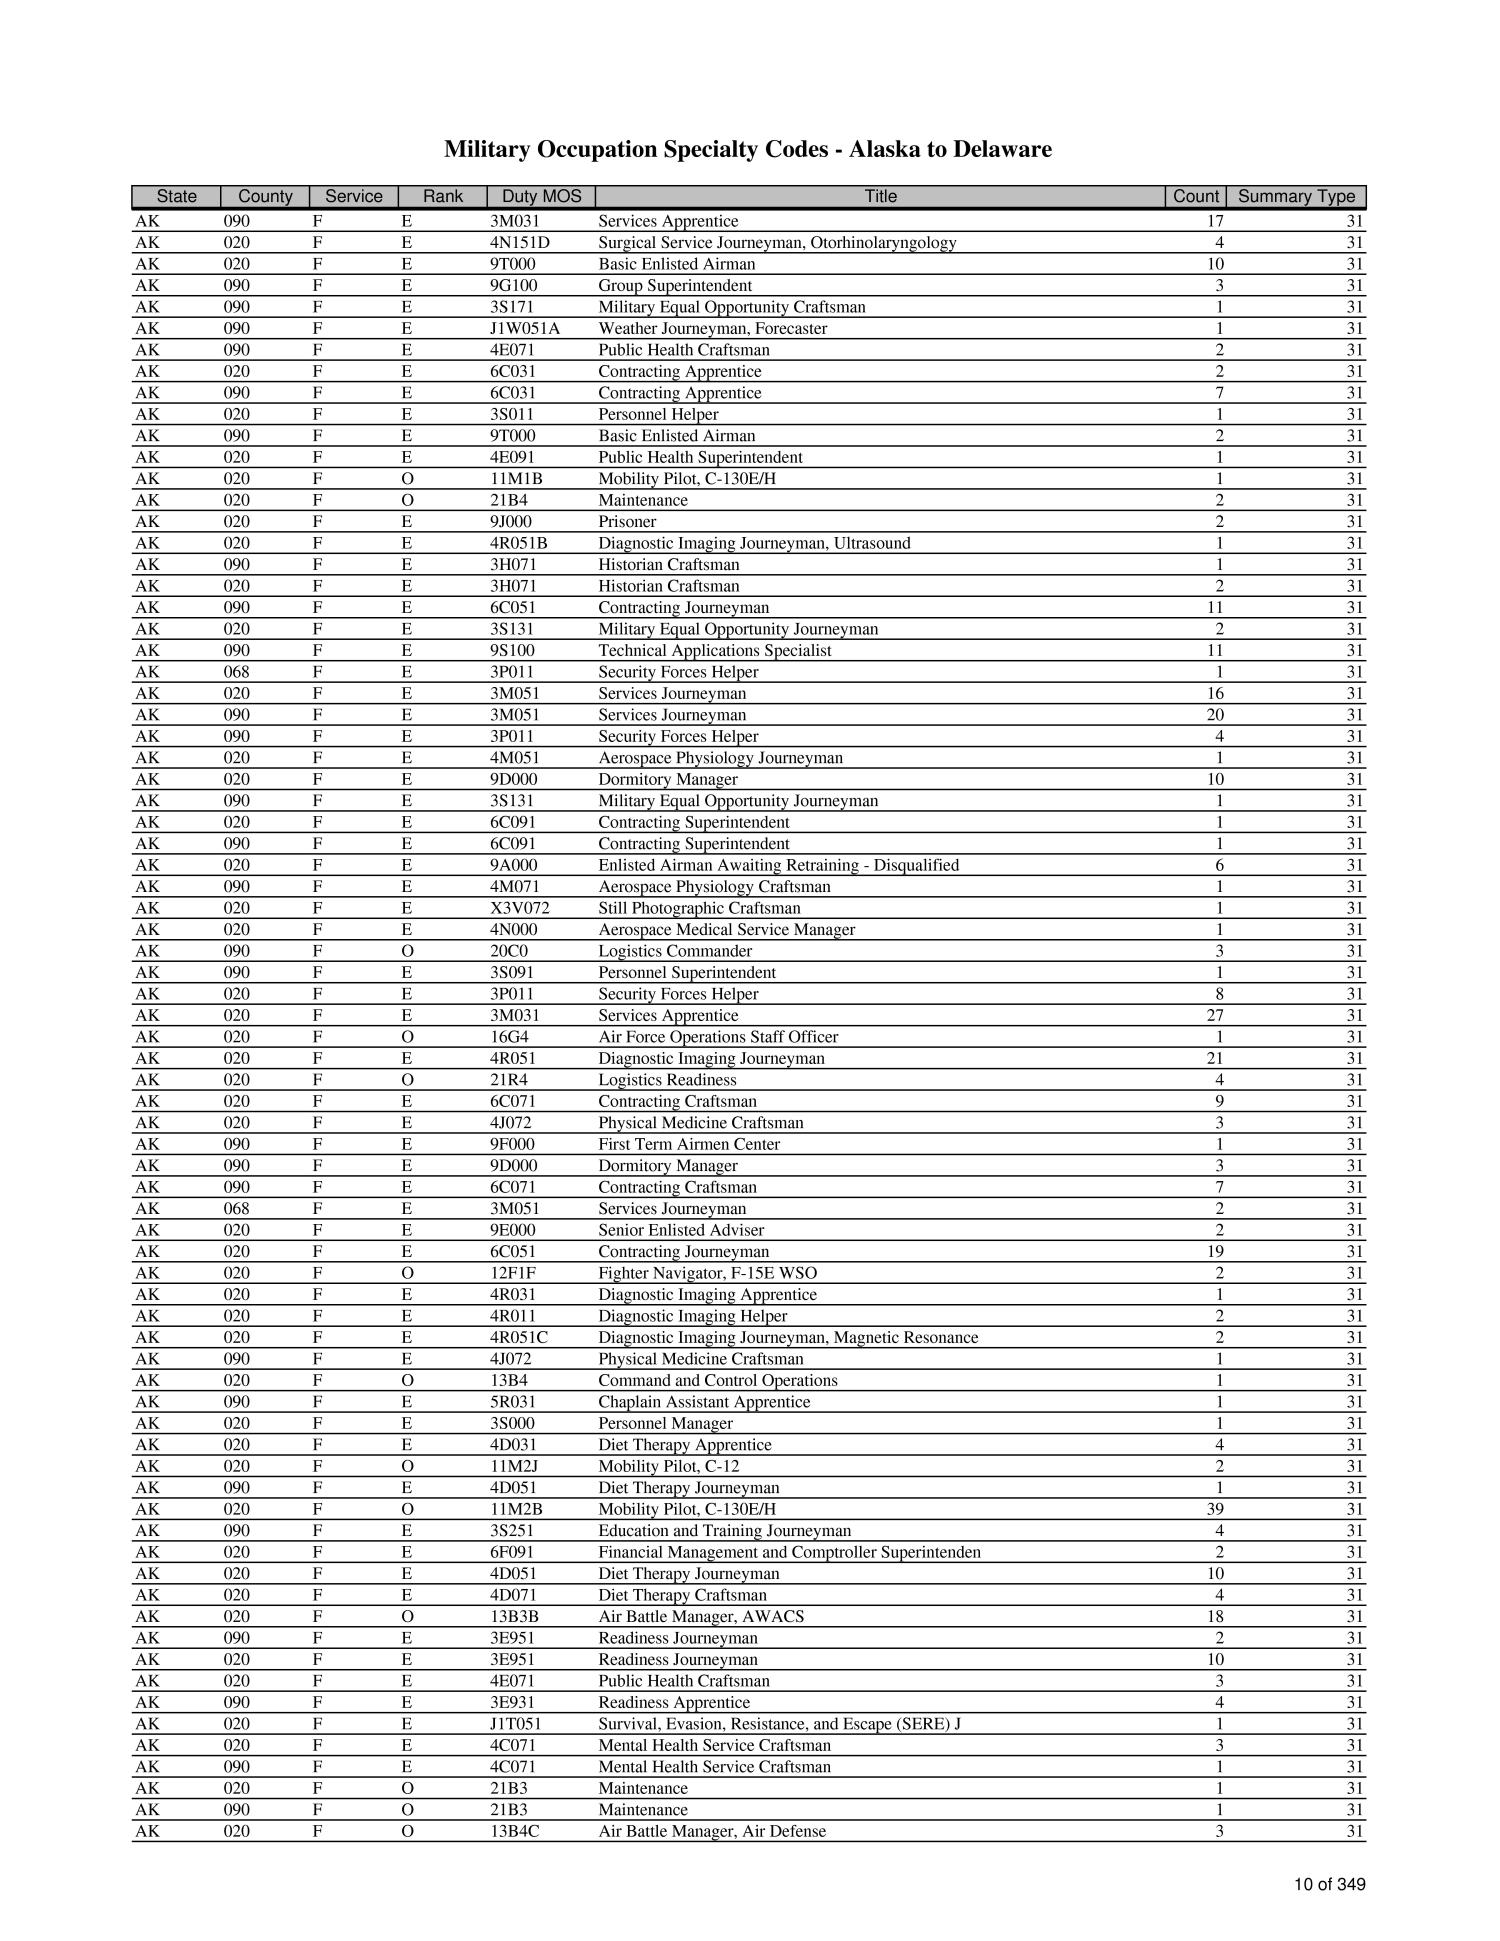 list-of-military-occupation-specialty-codes-mos-by-state-and-county-page-1-345-of-1-684